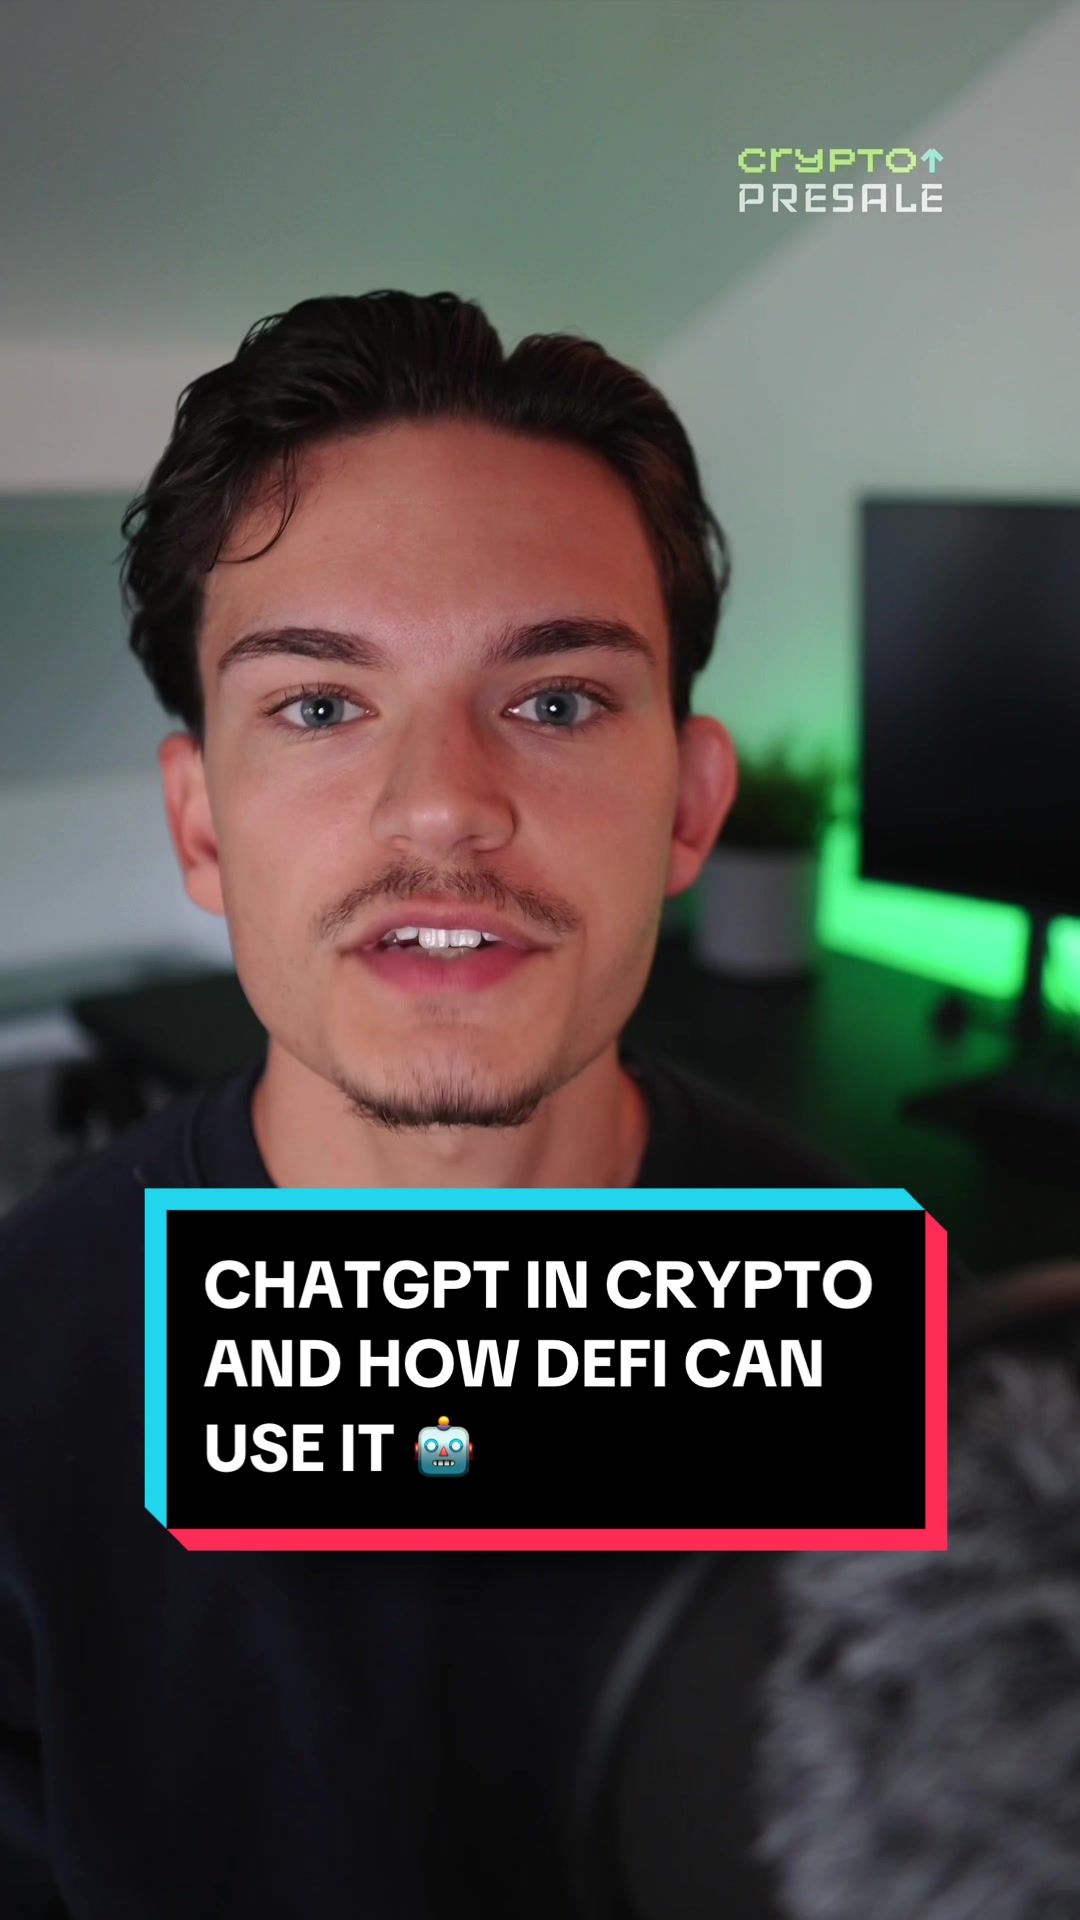 ChatGPT in Crypto: How DeFi can use it  #crypto #cryptocurrency #finance #chatgpt #cryptonews #cryptopresale